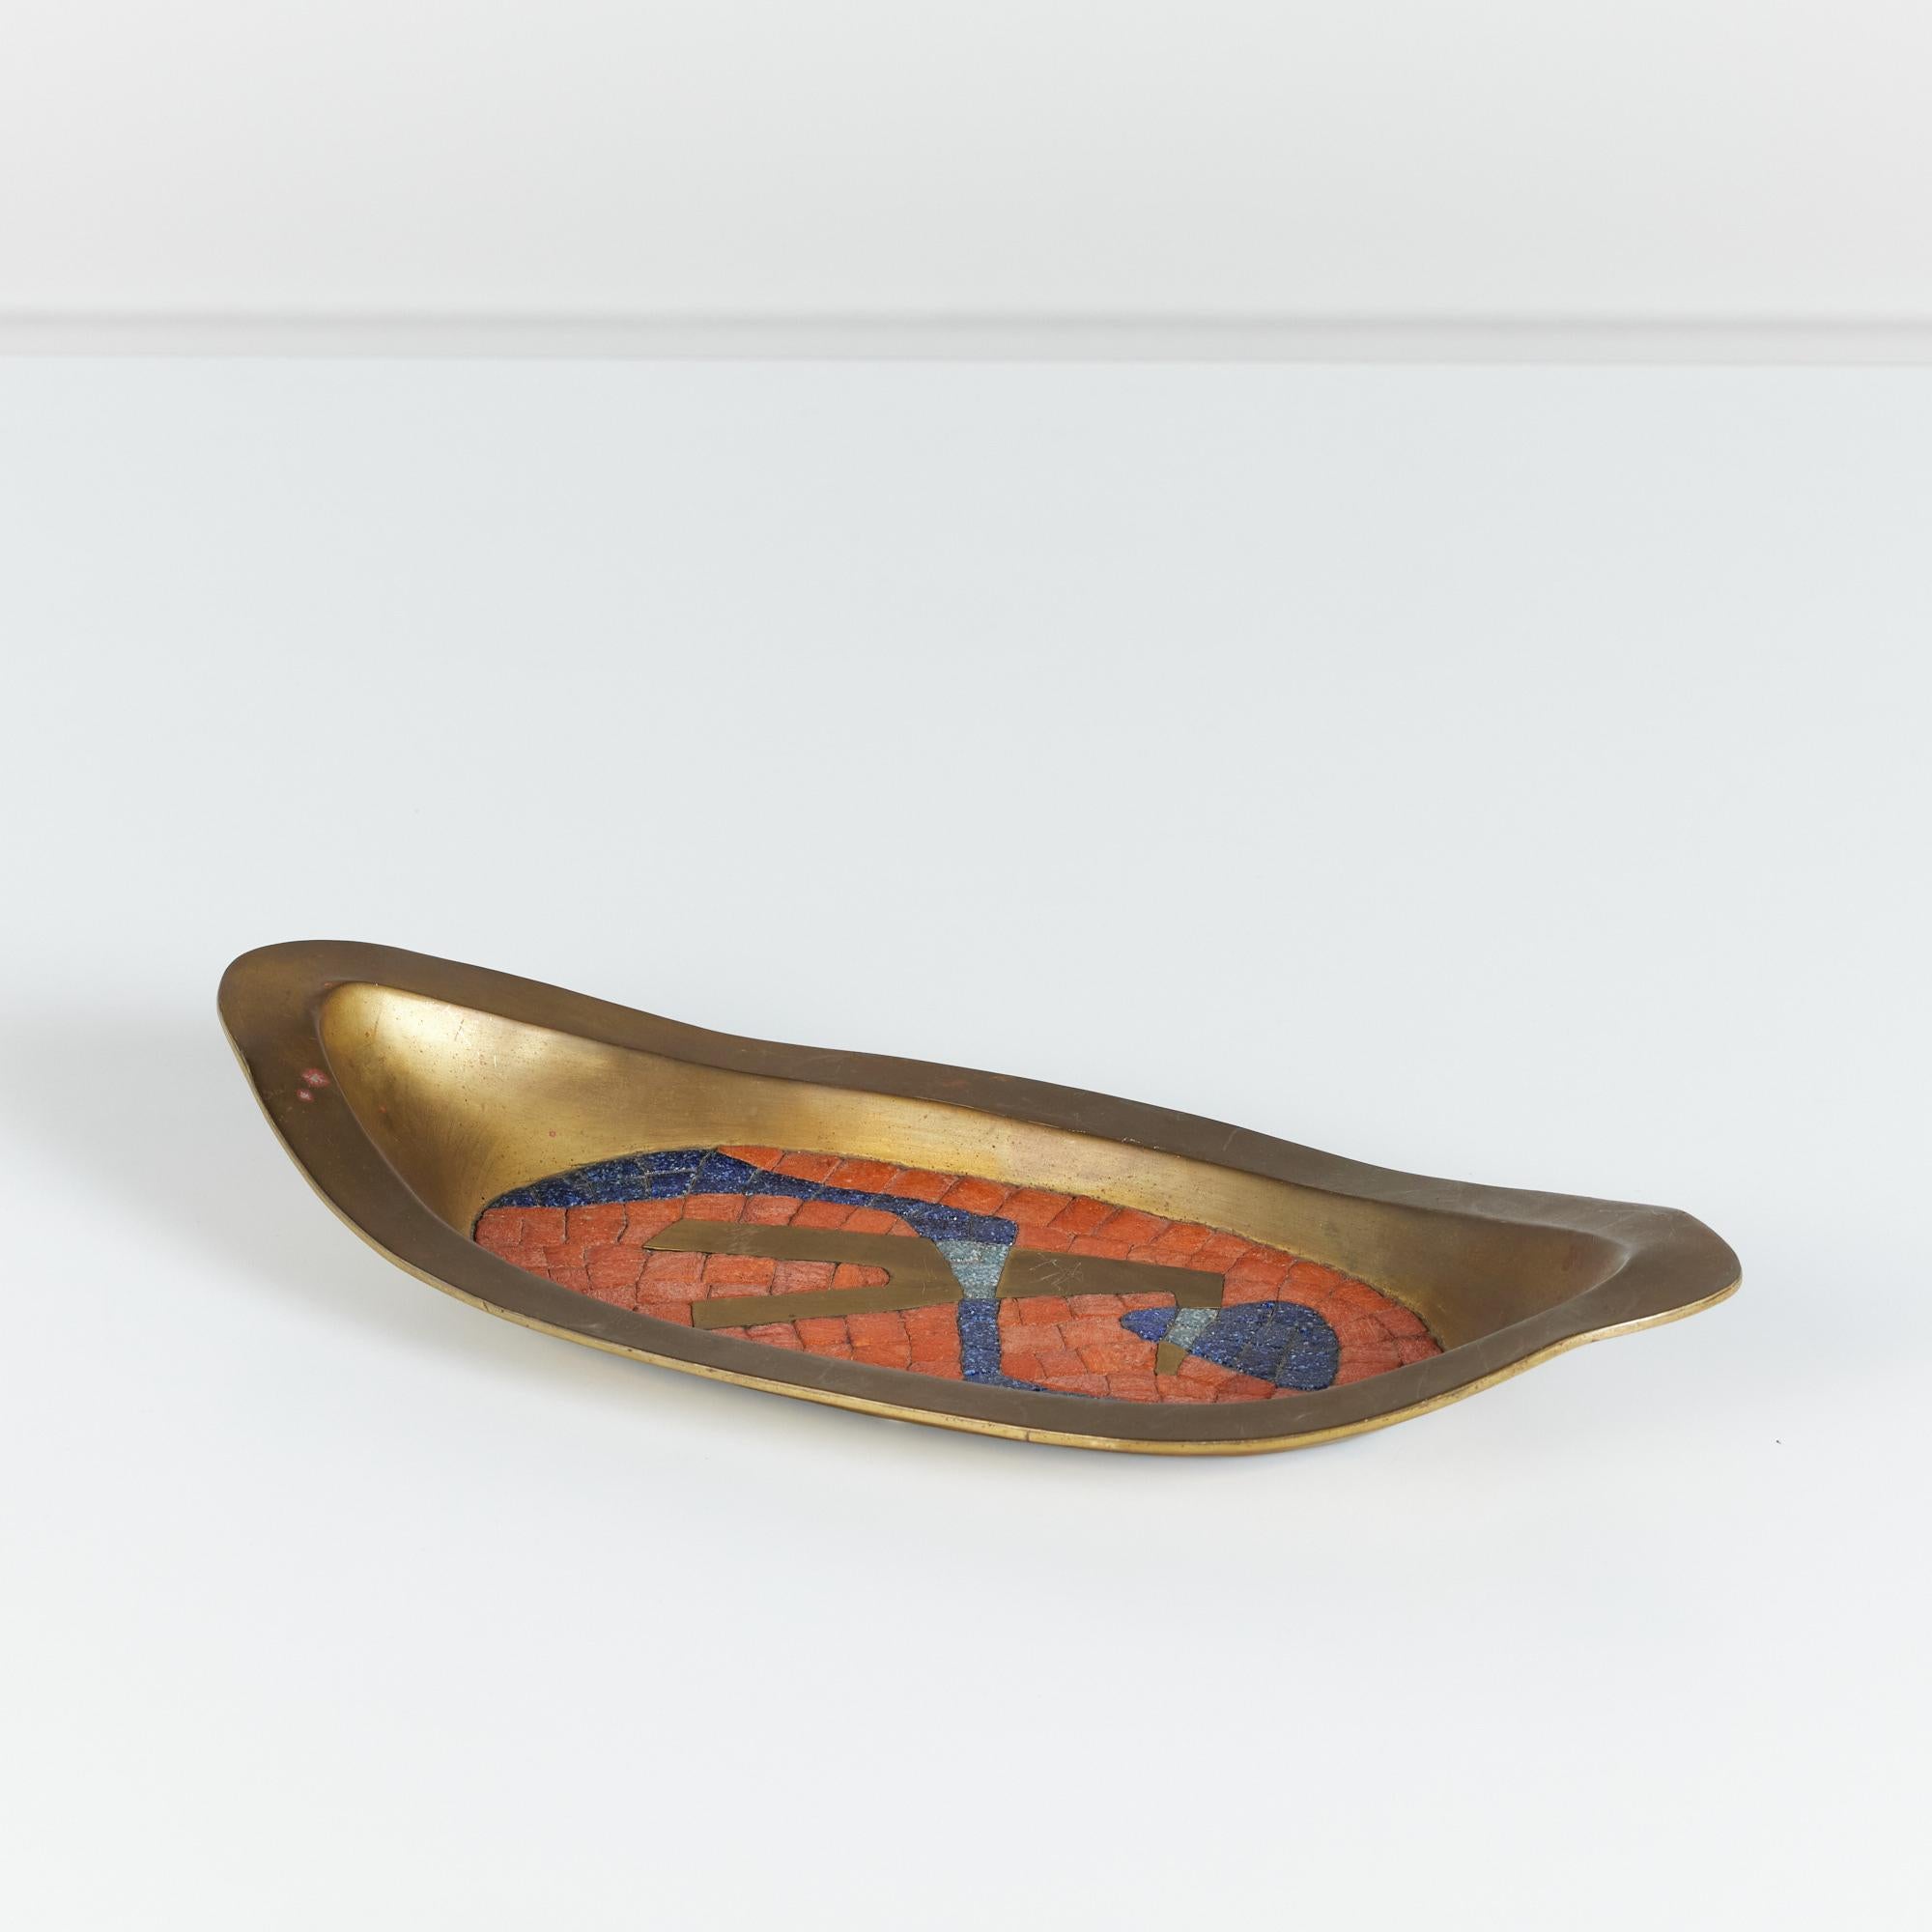 Oval handwrought brass dish in the style of Salvador Teran, circa 1950s Mexico. The tray features a square orange and blue speckled tile mosaic inlay that resembles a figure.

Dimensions
15